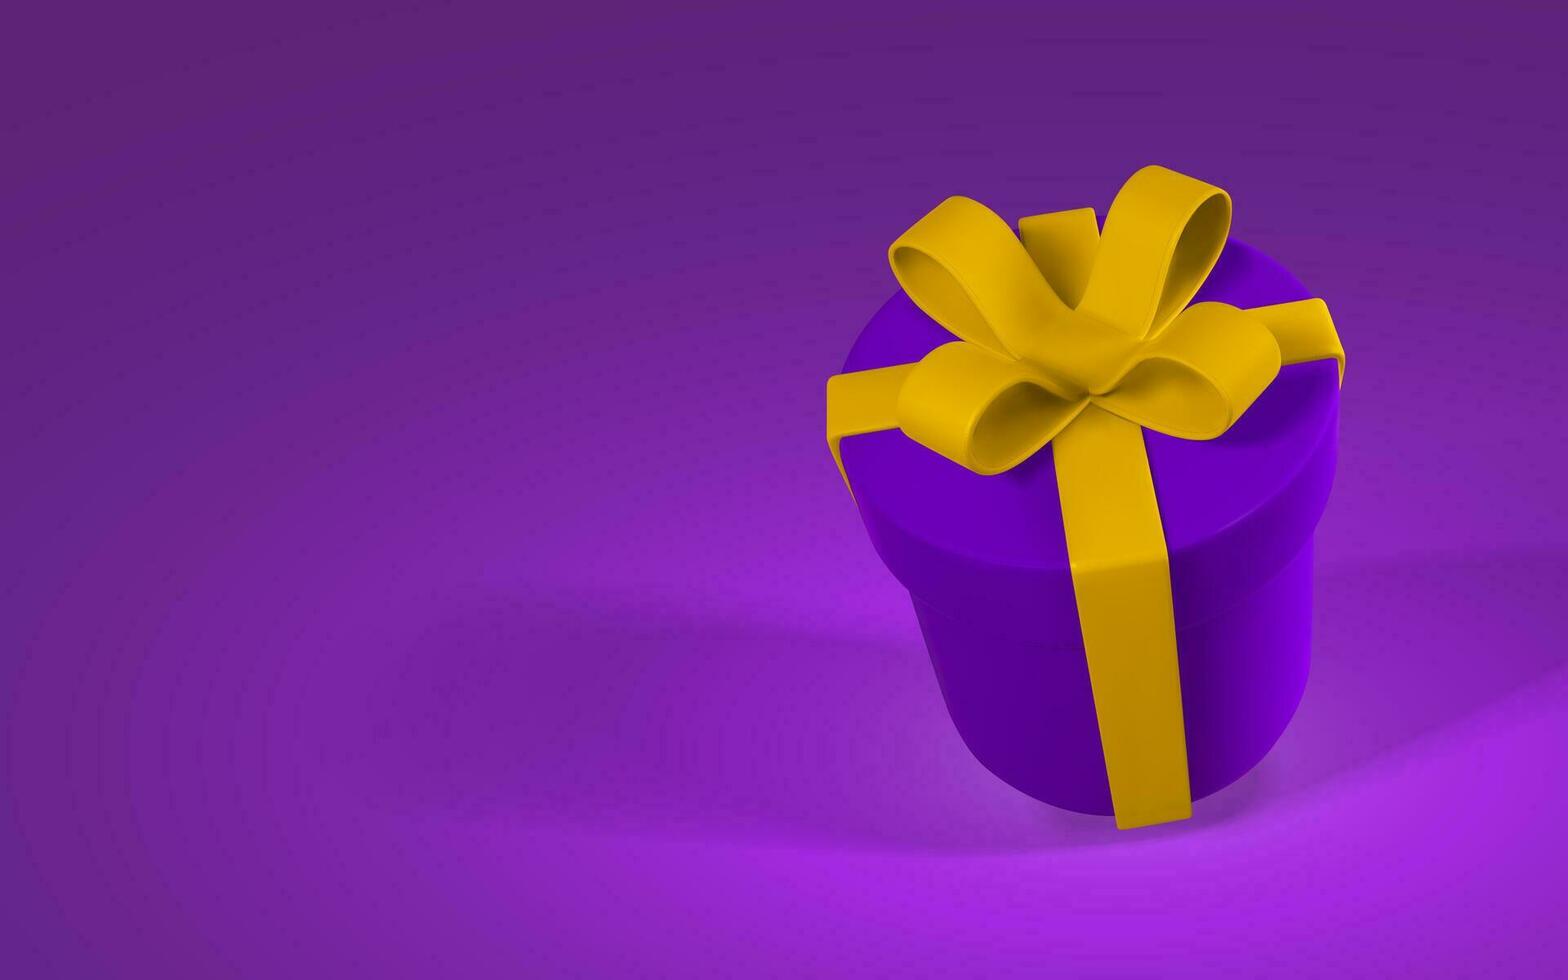 3D realistic purple gift box with yellow bow and ribbon. Paper box with shadow isolated on purple background. Vector illustration